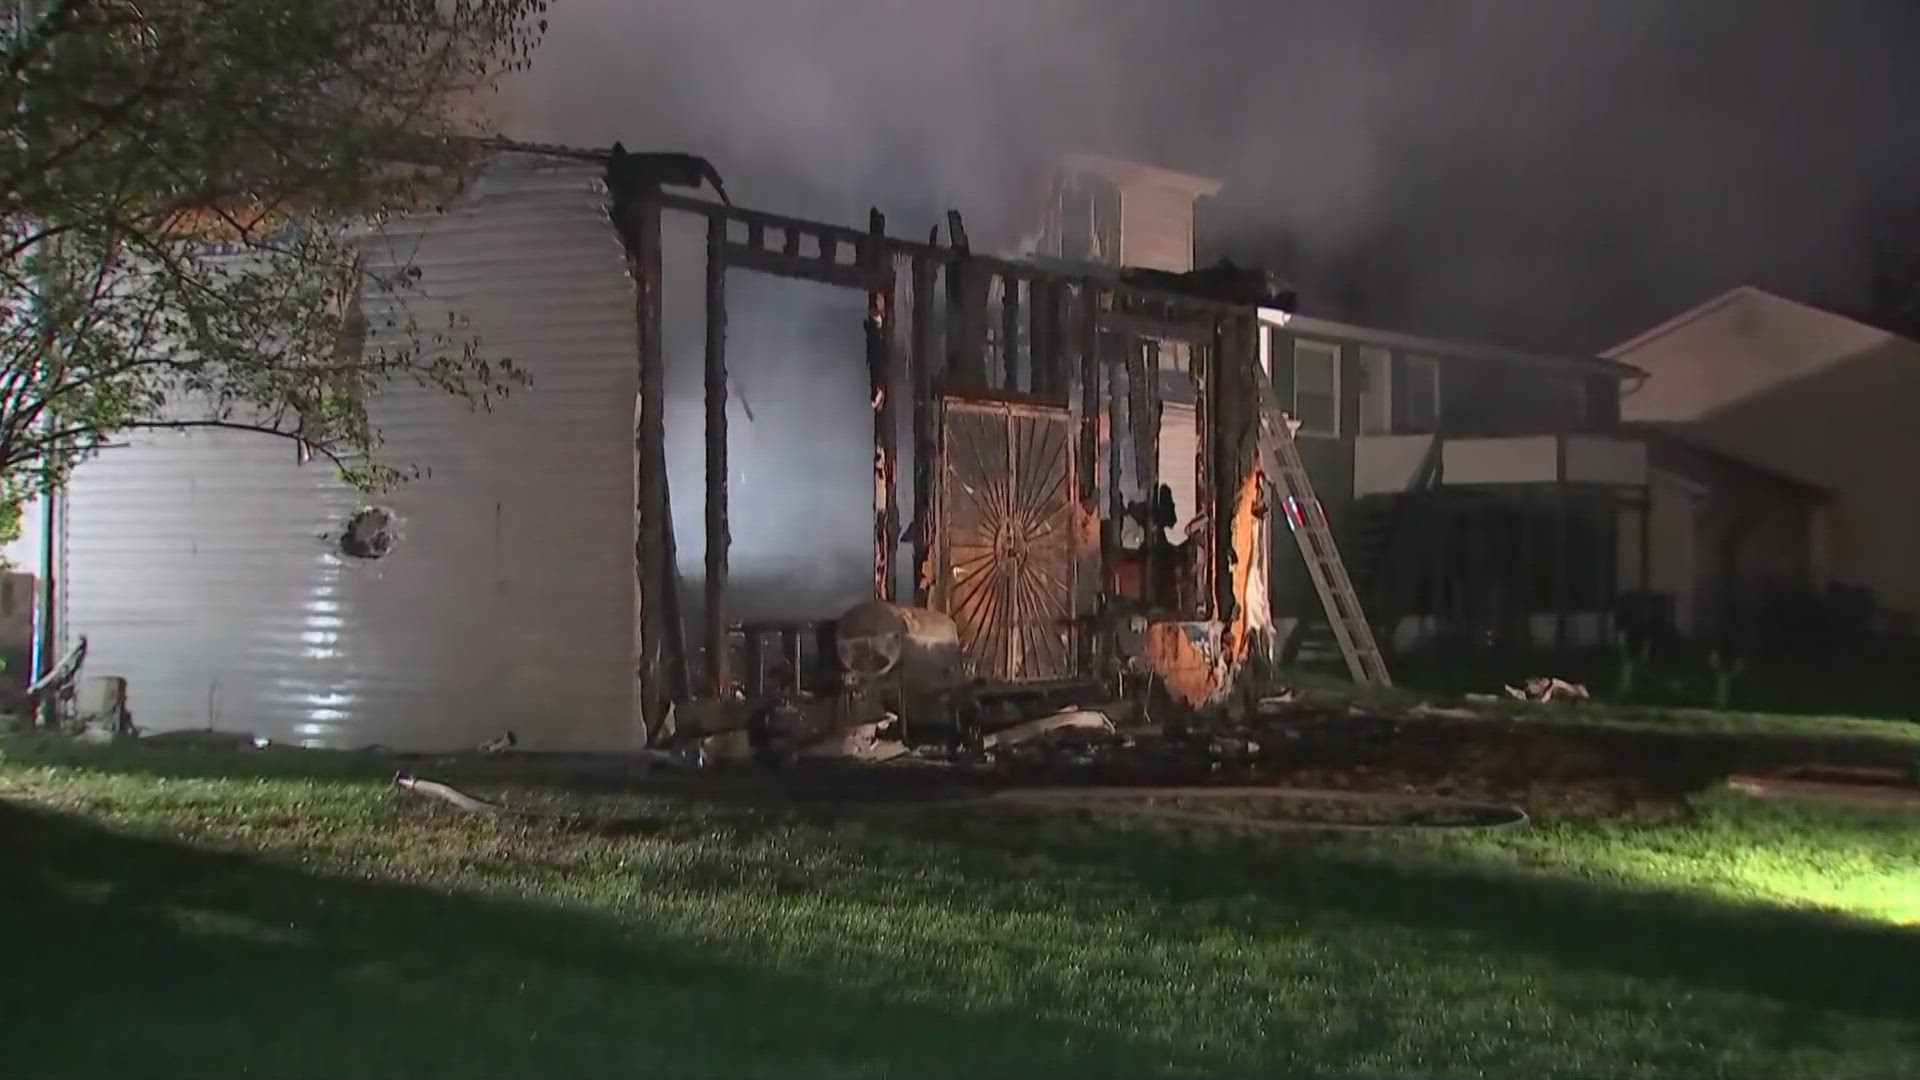 One person is dead after a house fire on Marlin Drive in southeast Columbus early Thursday morning.